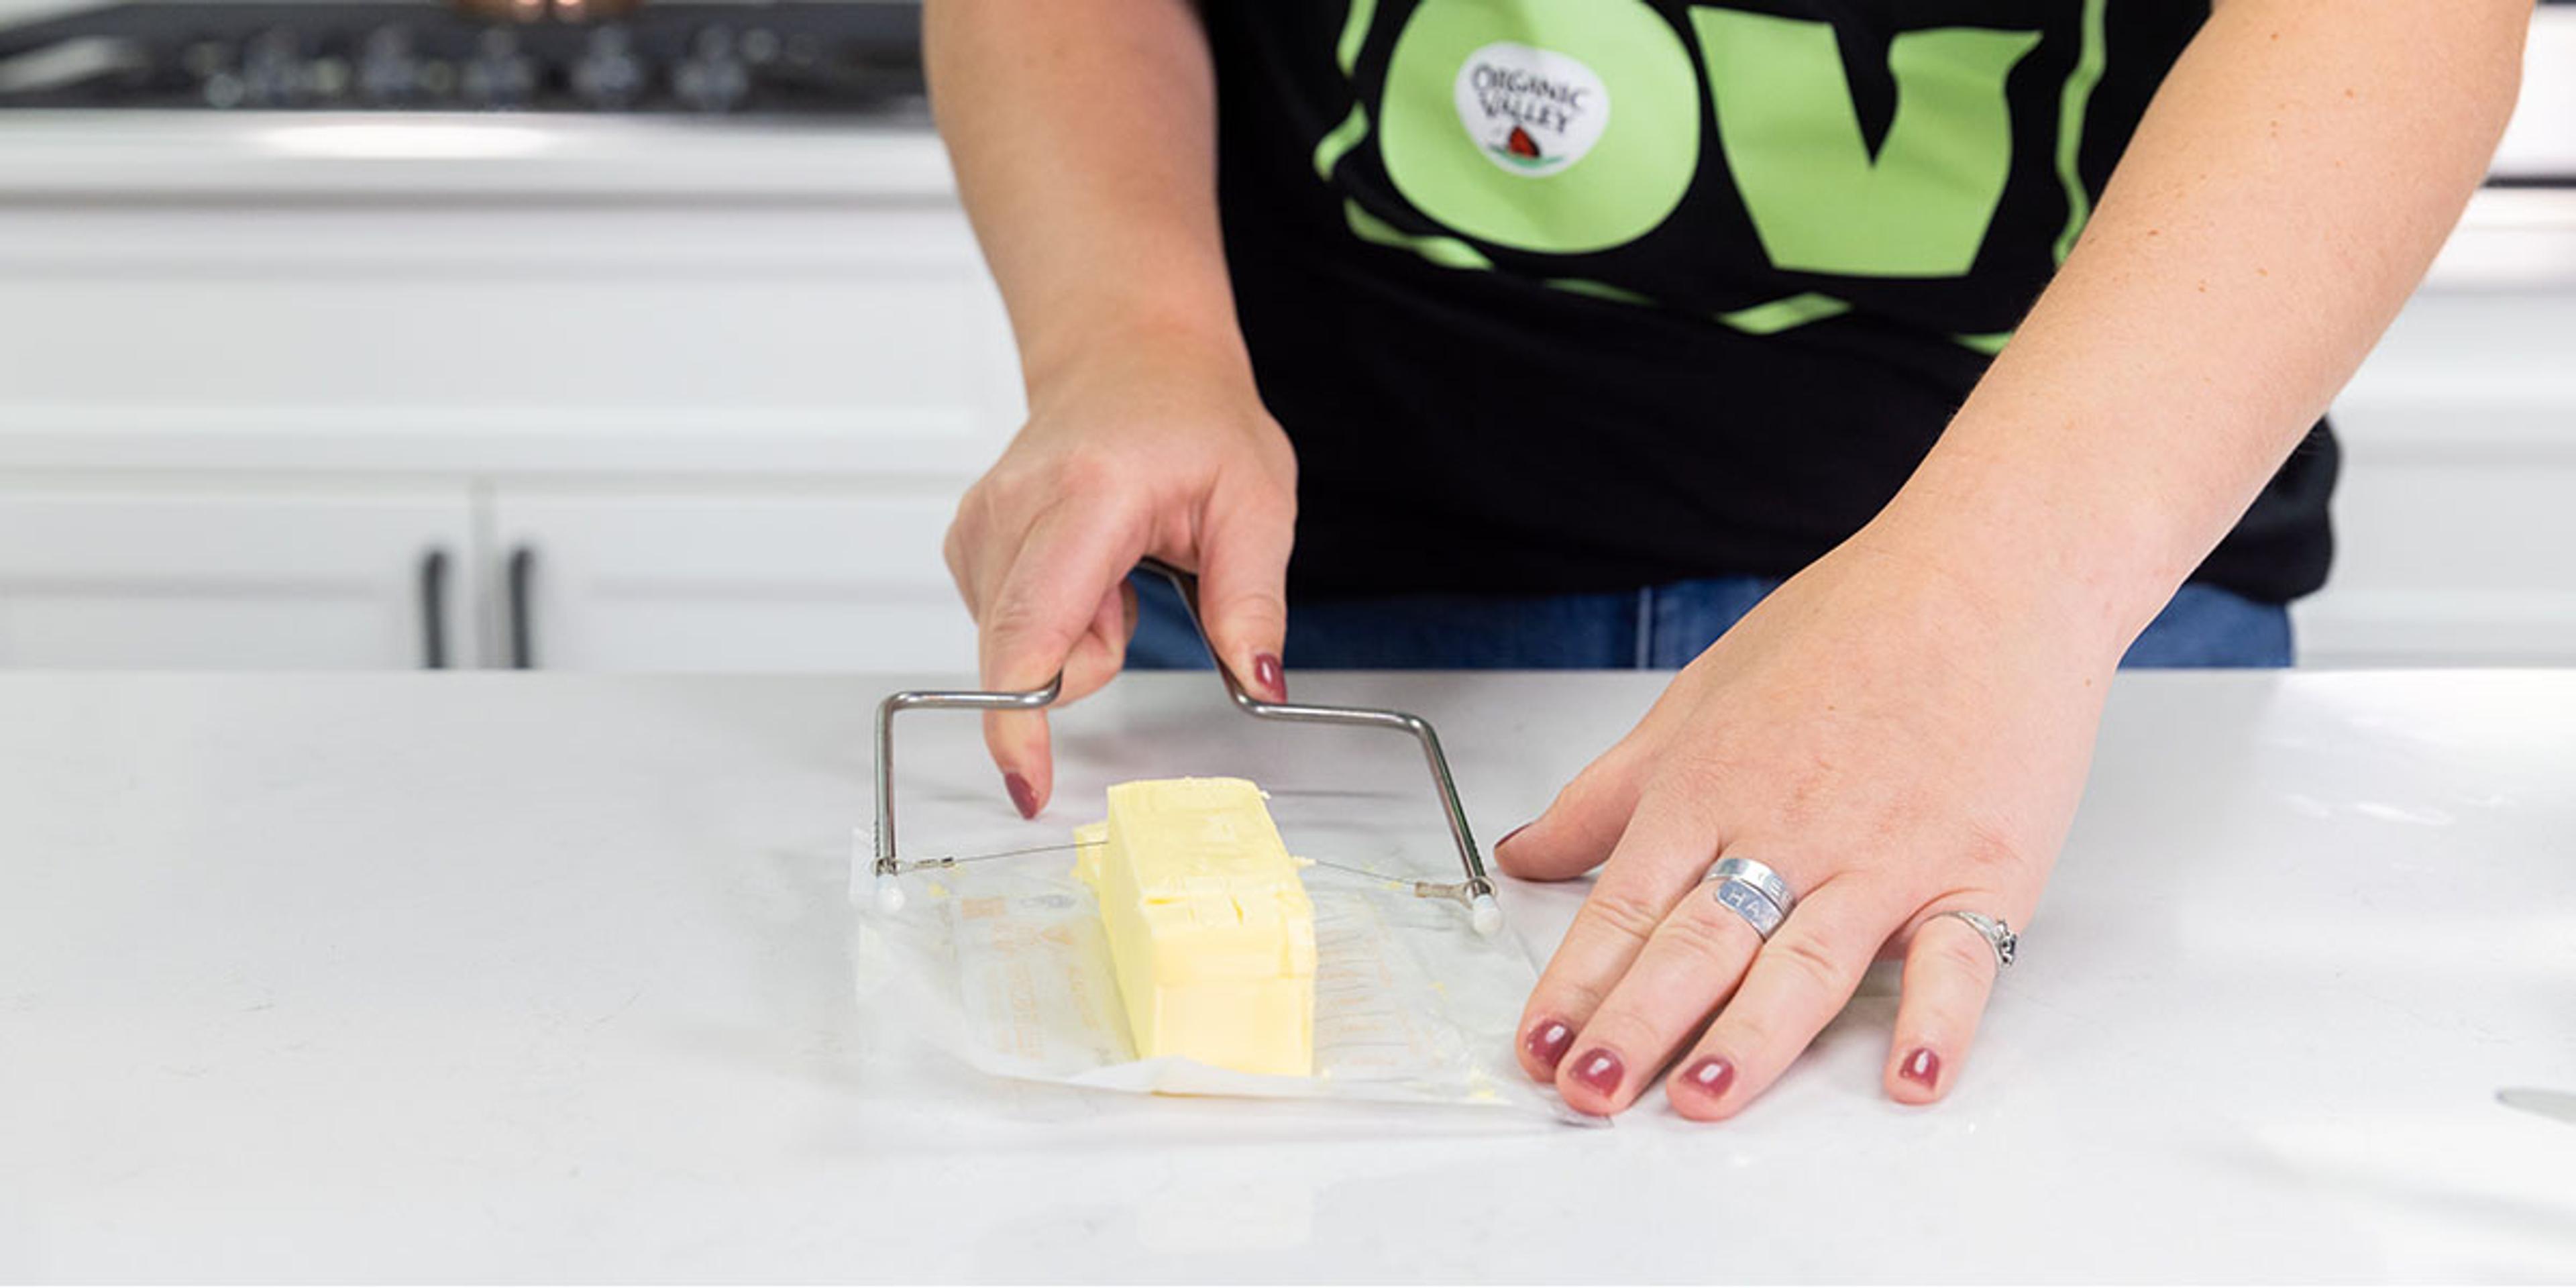 A woman wearing an Organic Valley T-shirt slices butter with a wire butter cutter.